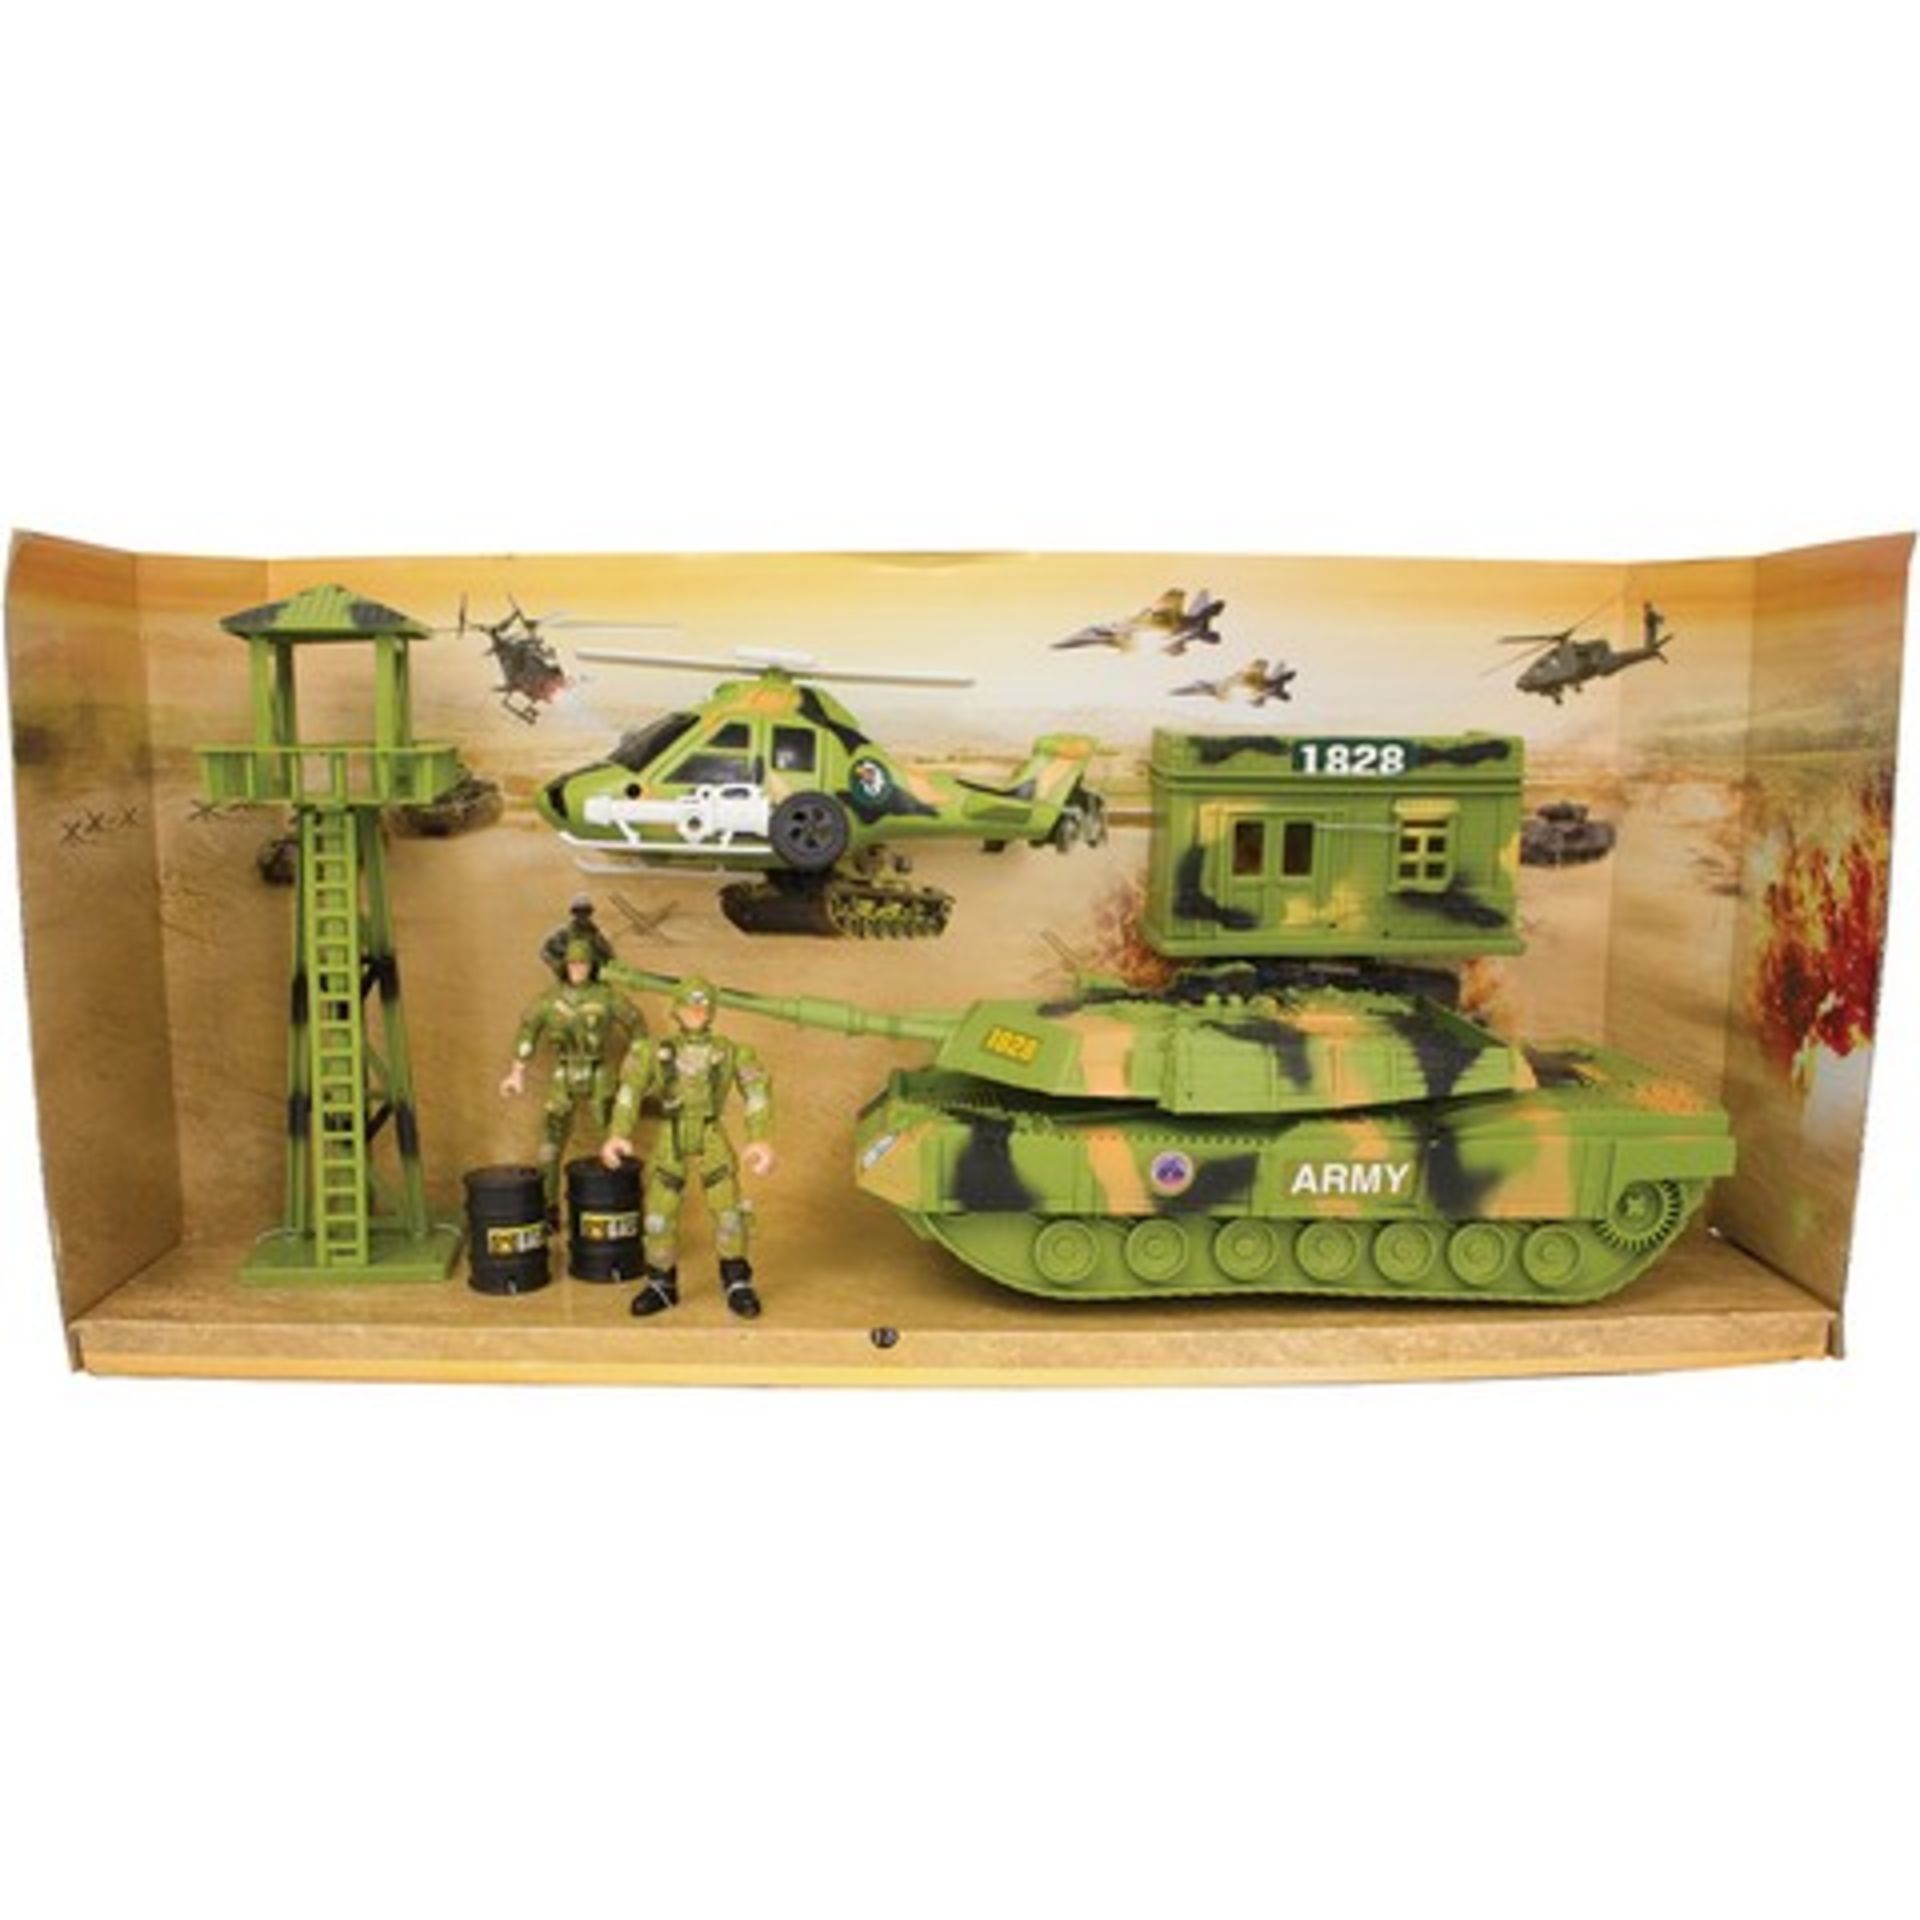 V Brand New Military Operation Action Play Set Including 2 Soldiers - Look-Out Tower -